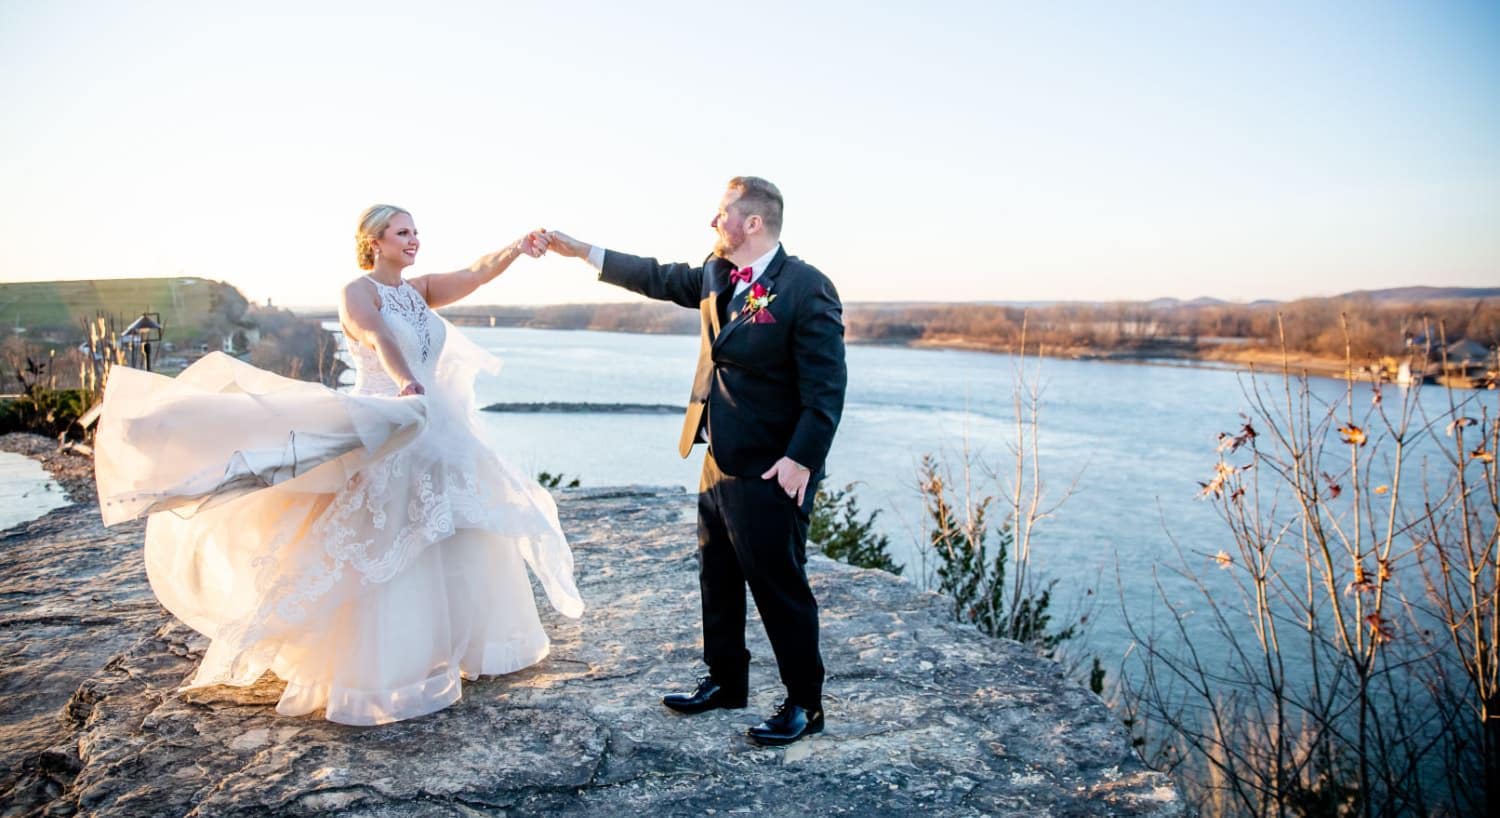 Lady in a white dress holding the hand of a man in black suit standing on a rock with a river in the background